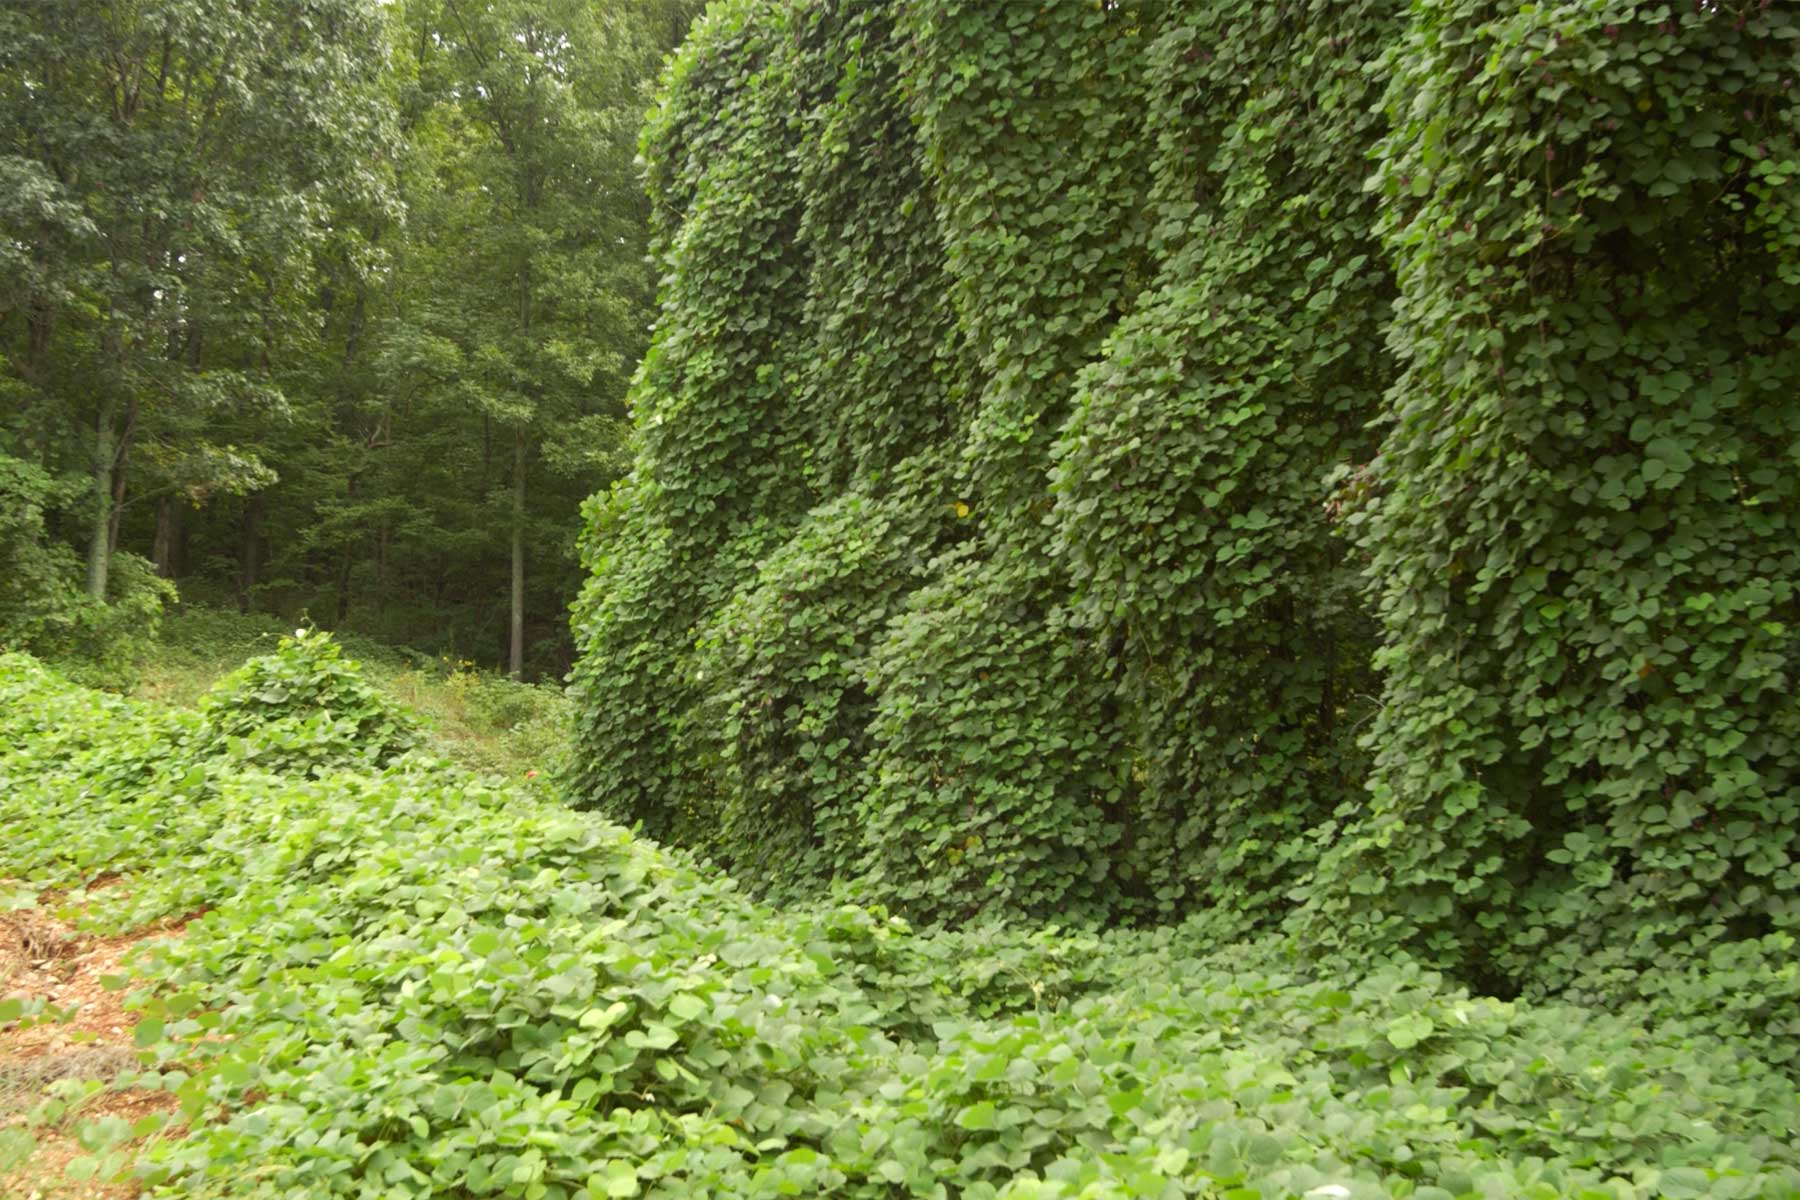 A dense blanket of kudzu vines covering several trees and the ground around them